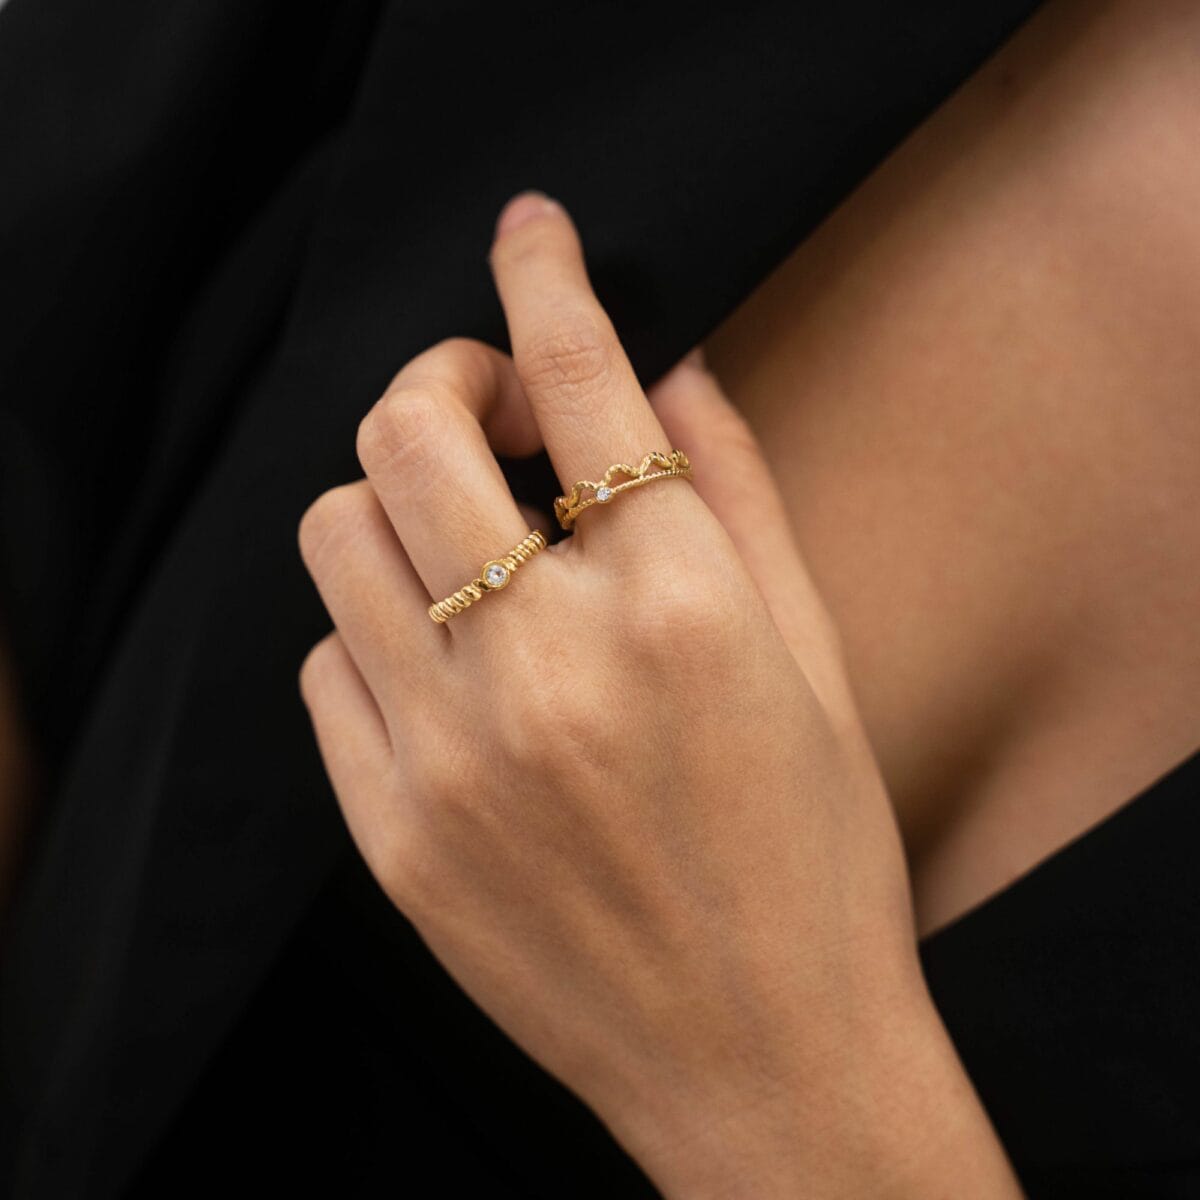 https://m.clubbella.co/product/gold-solitaire-wavy-ring/ DSC00109